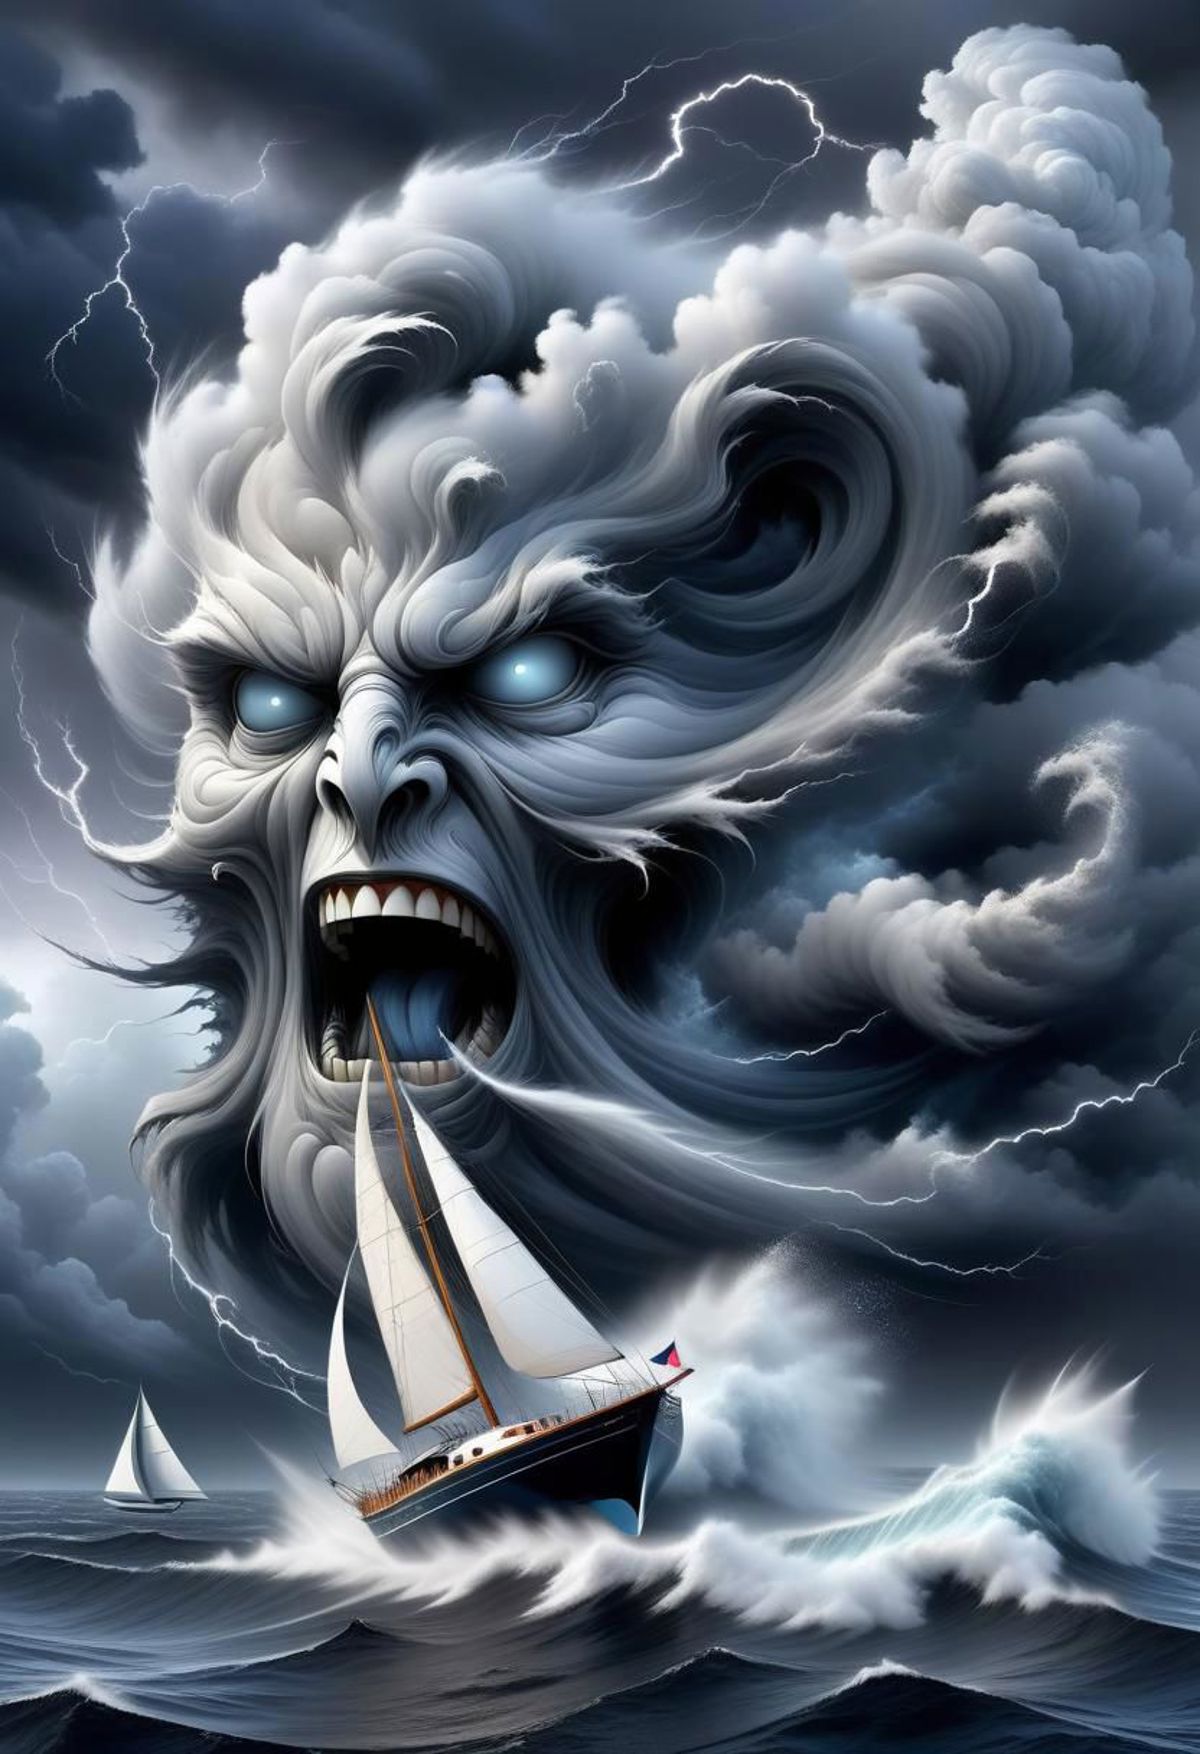 A painting of a monster with a ship in its mouth.